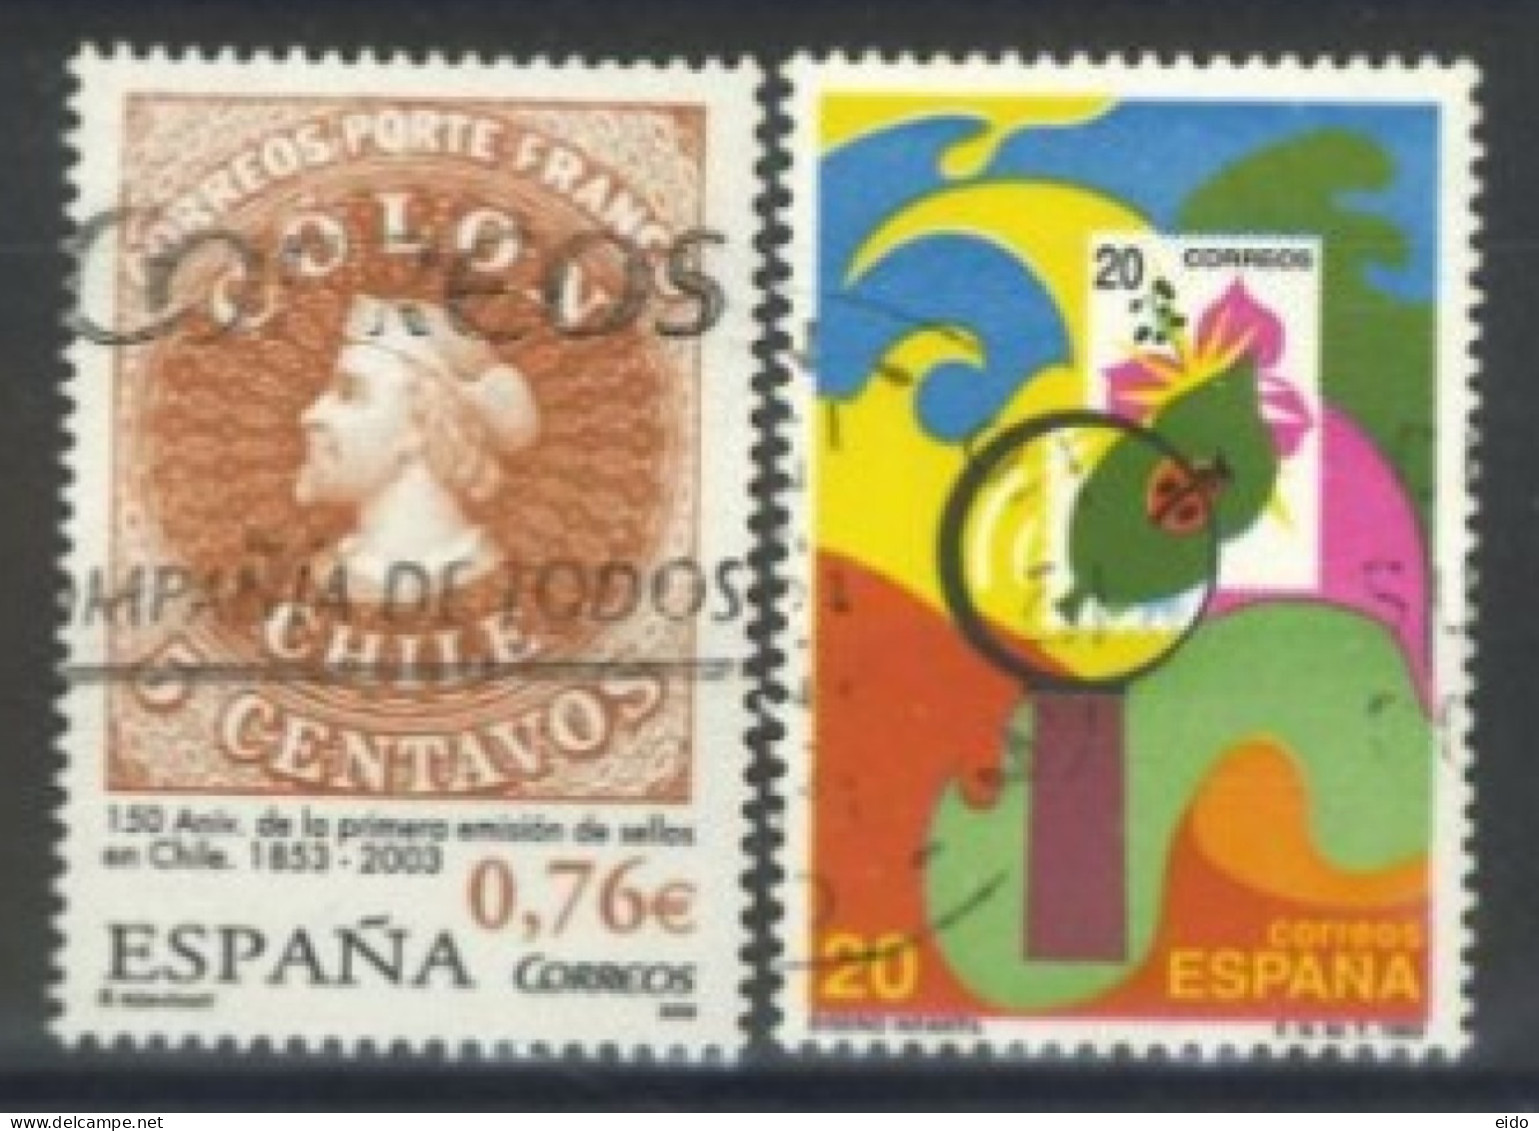 SPAIN,1989/2003, STAMP COLLECTING & CHILEAN POSTAGE STAMPS SET OF 2, # 2592, 3227, USED. - Usados